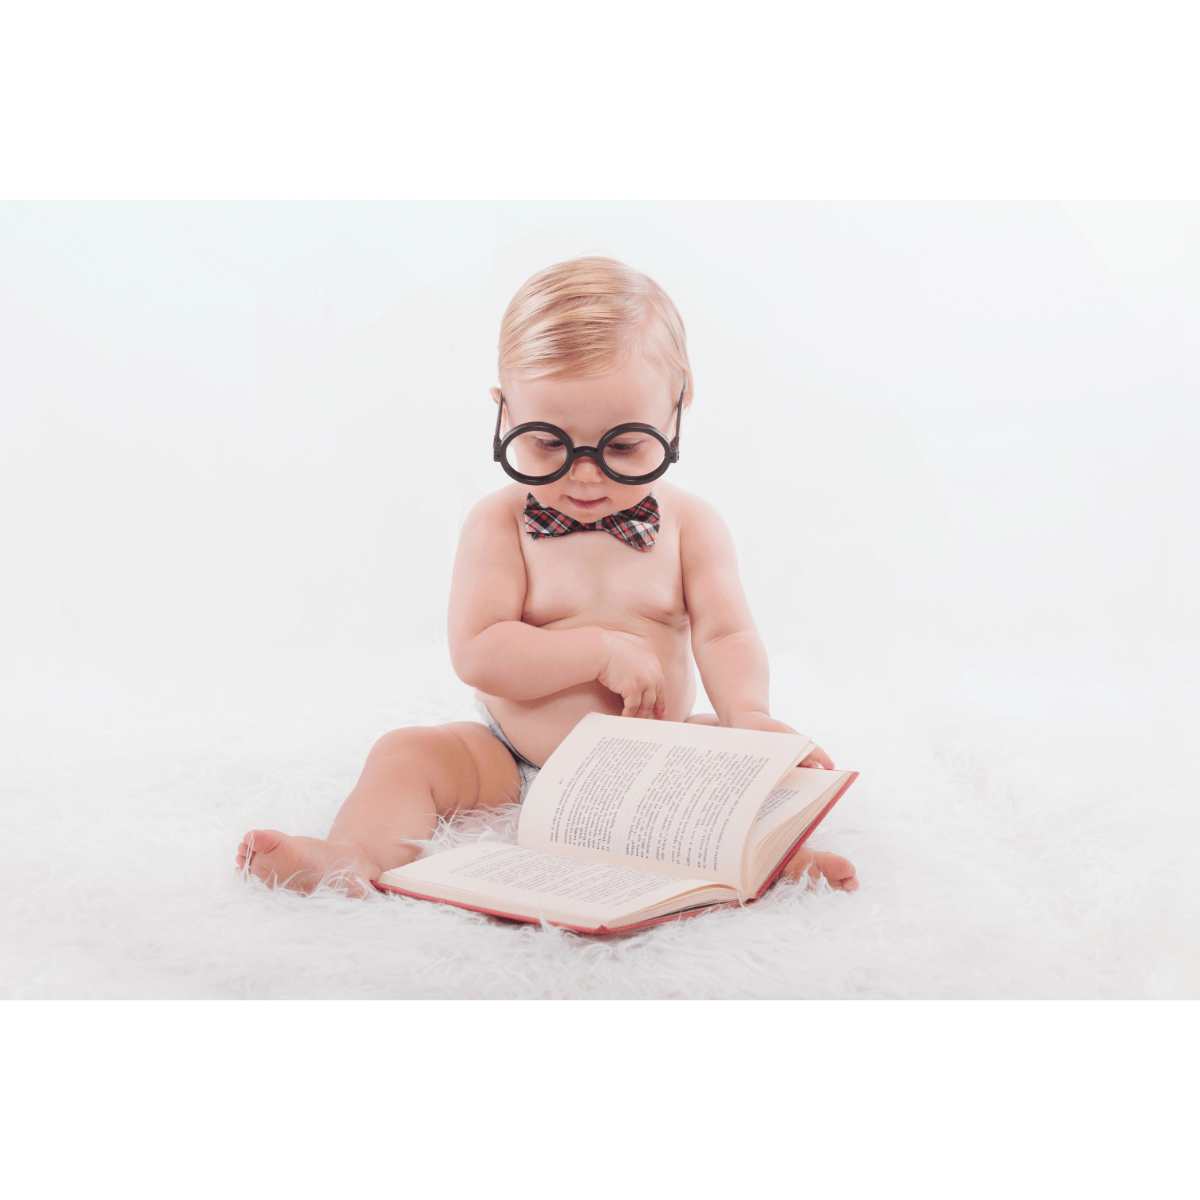 Baby reading Book